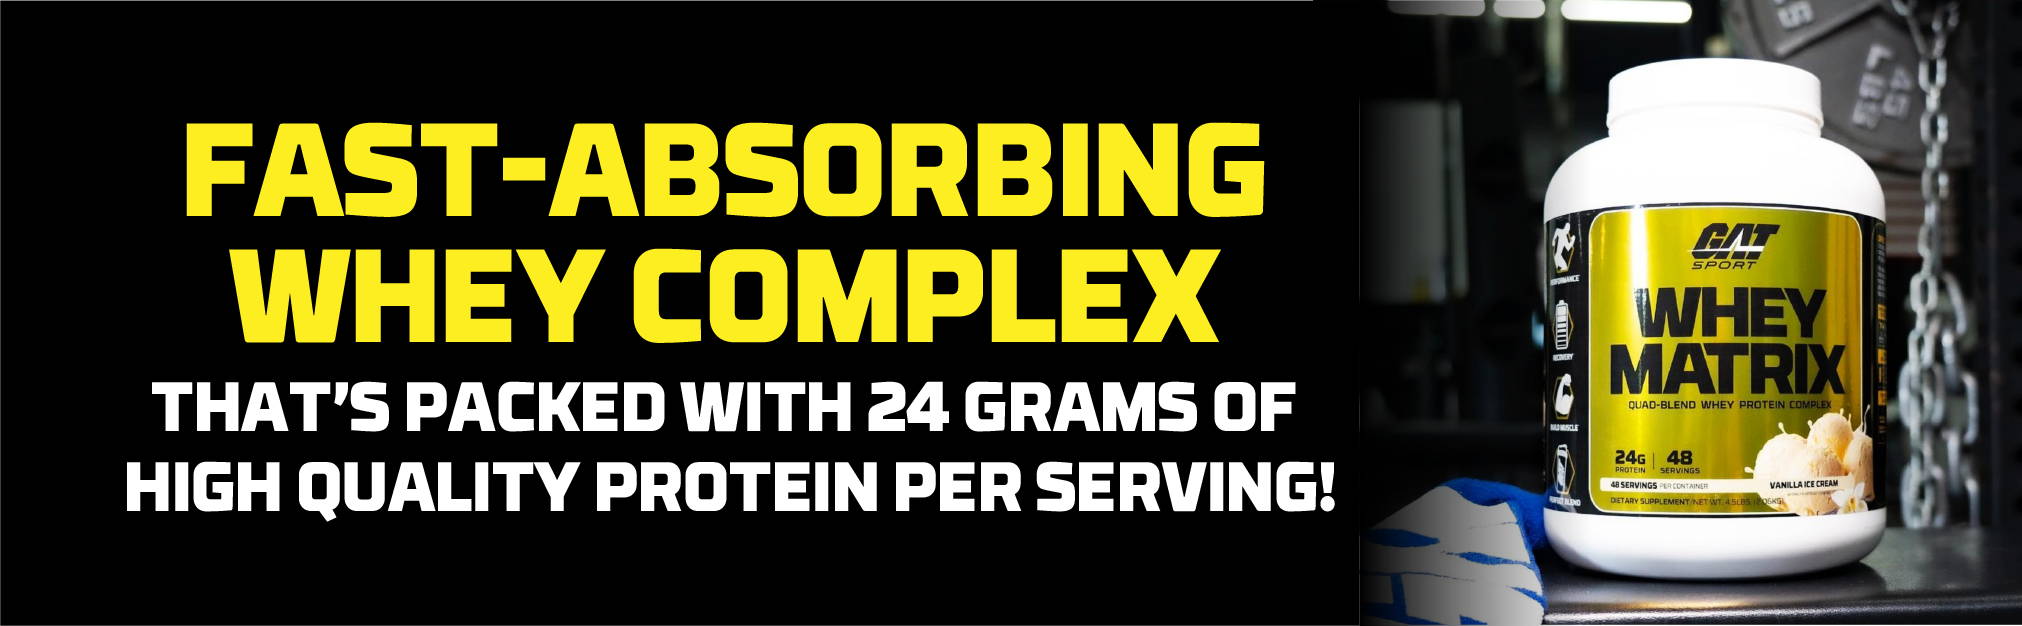 Fast-absorbing Whey Complex